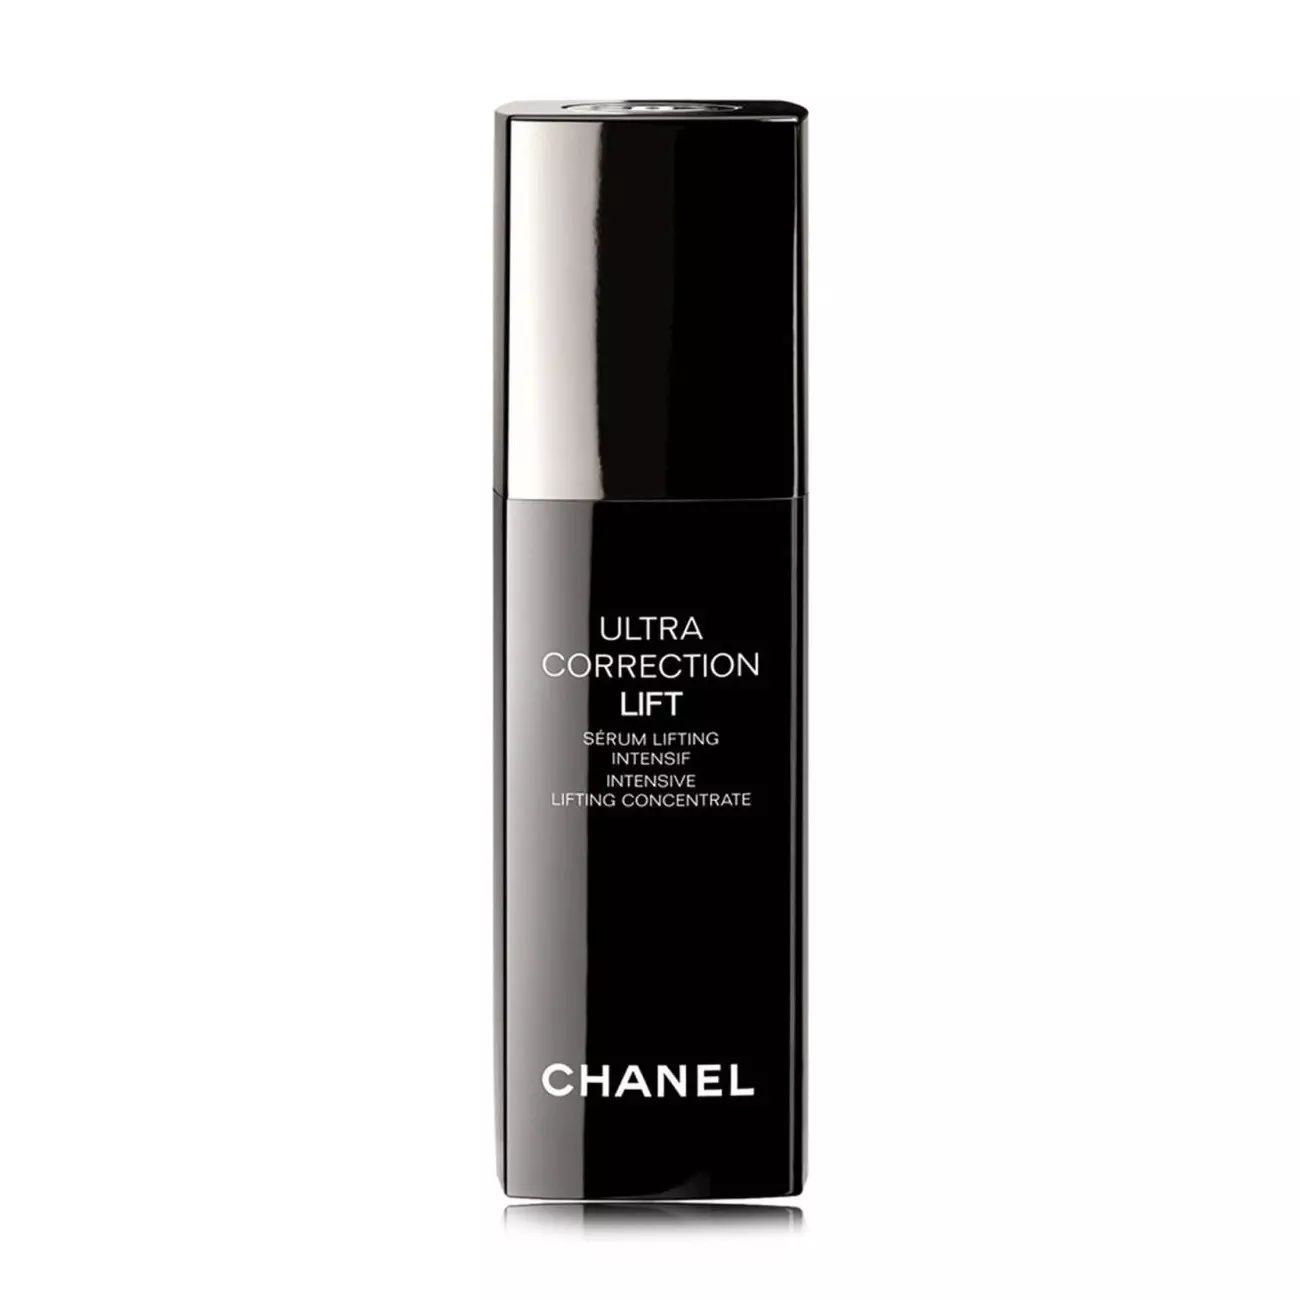 Chanel Ultra Correction Lift Intensive Lifting Concentrate